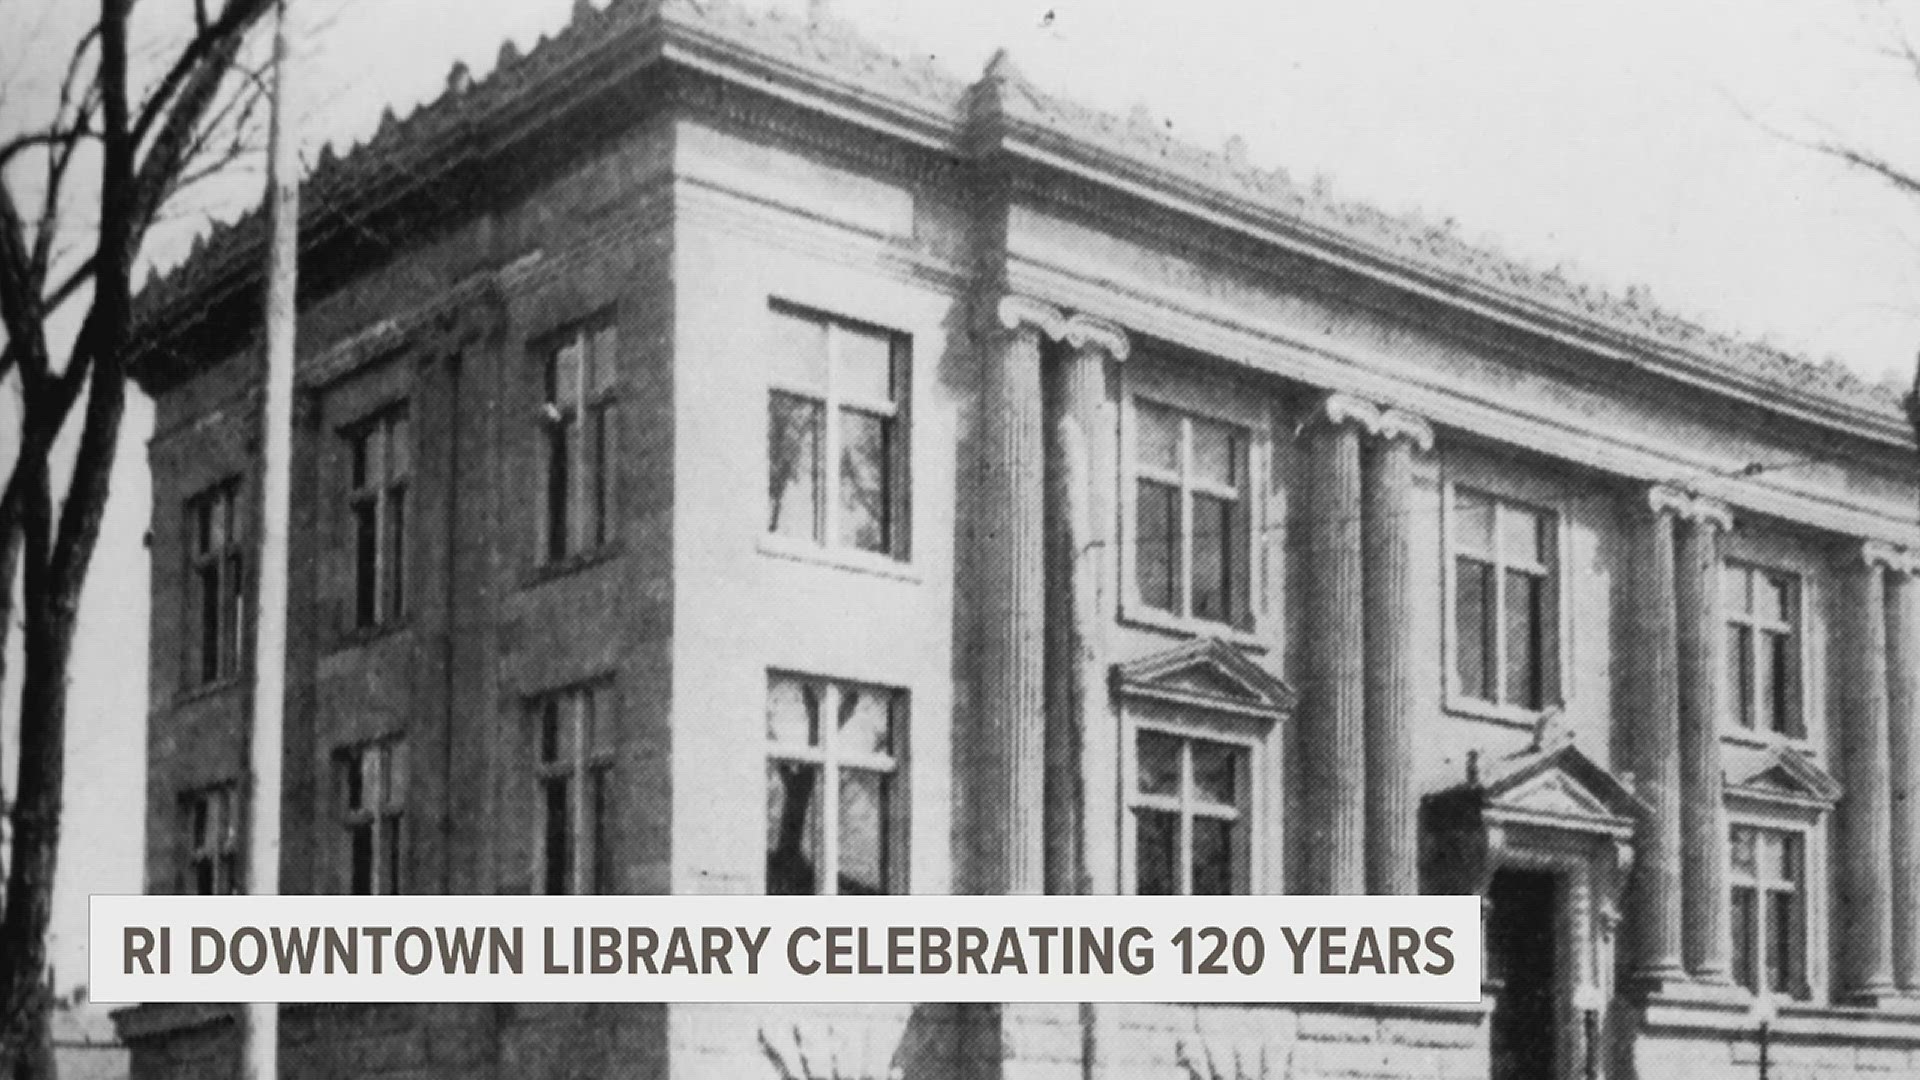 The downtown Rock Island Library first opened their doors in 1903, and continues to support residents by adapting much of their collection to a digital format.